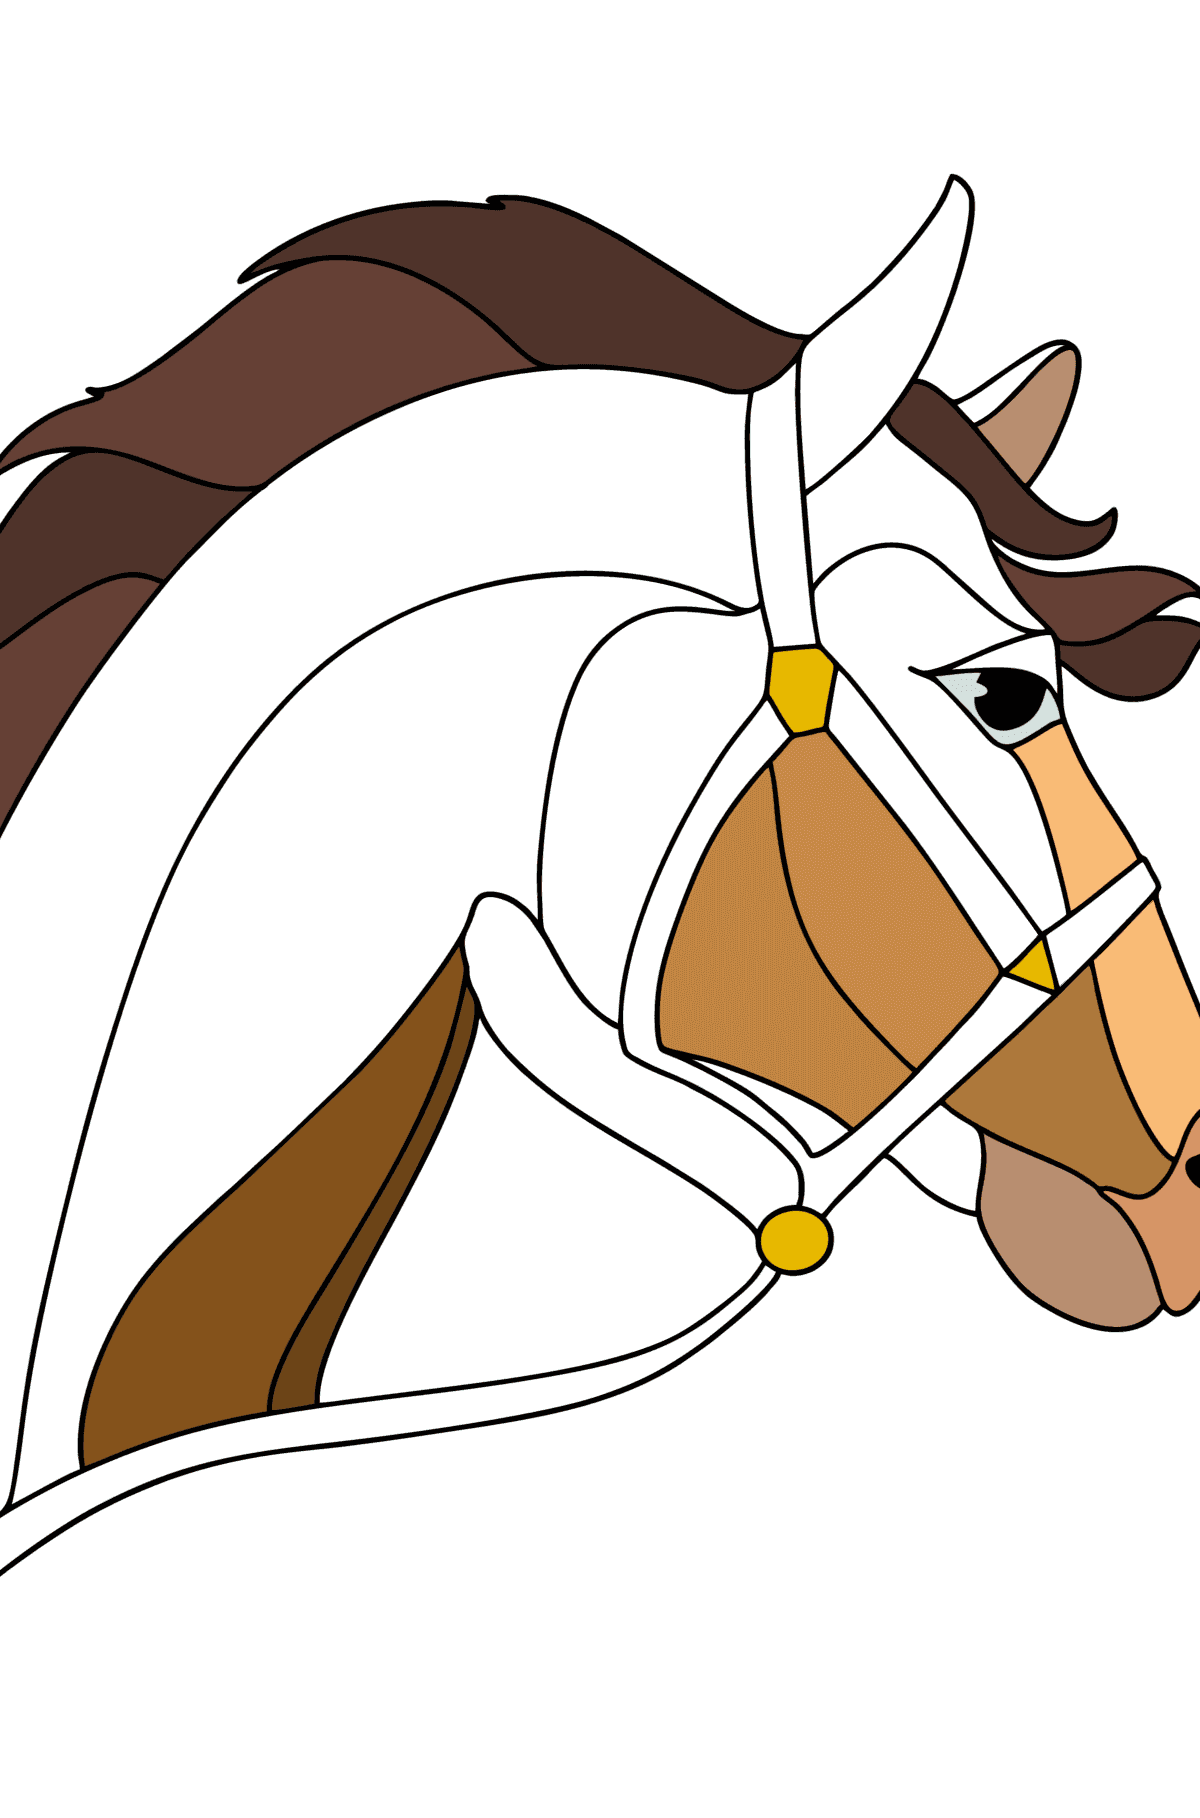 Horse head сoloring page - Coloring Pages for Kids